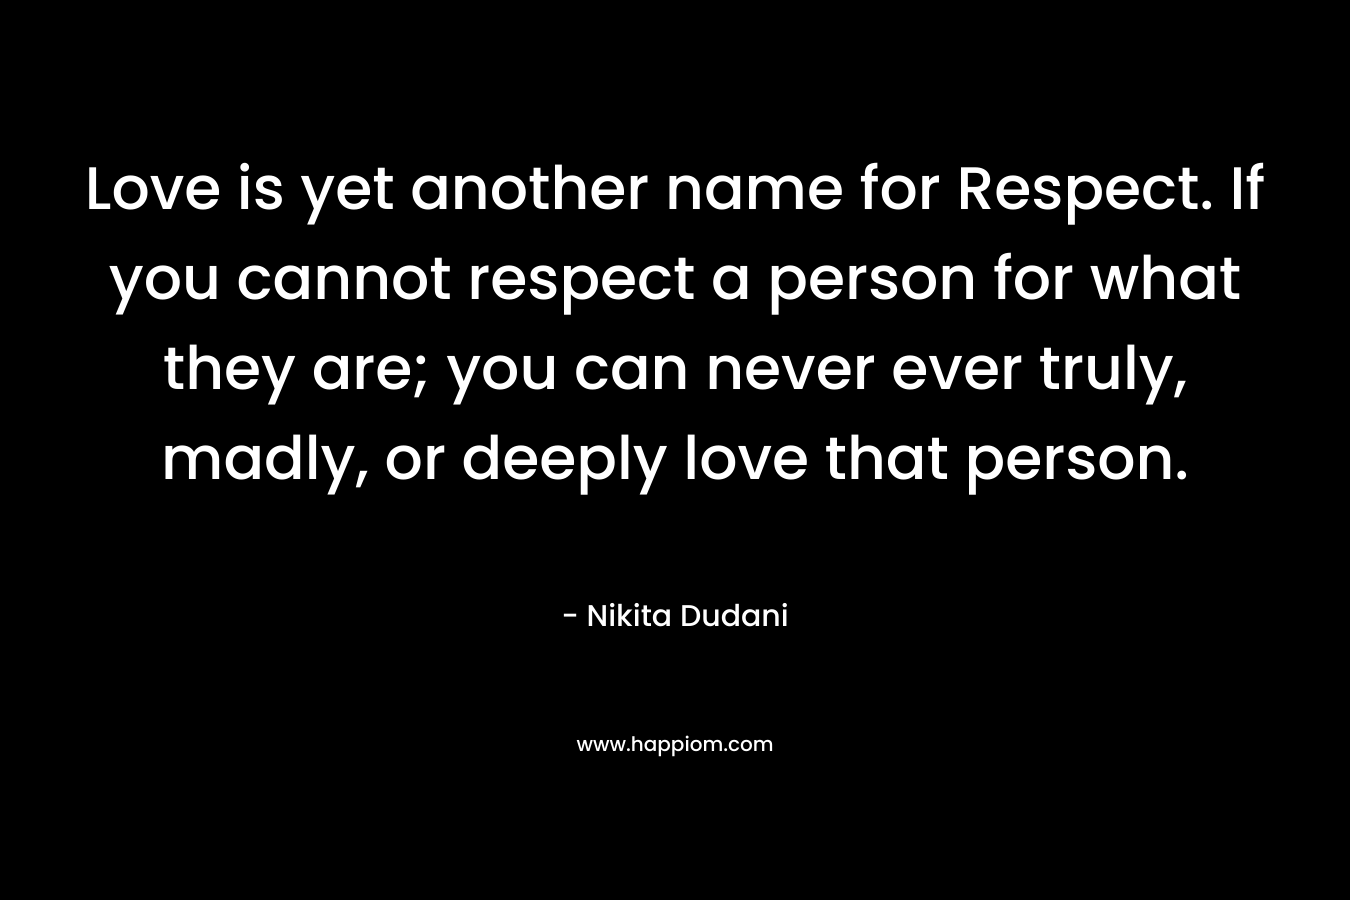 Love is yet another name for Respect. If you cannot respect a person for what they are; you can never ever truly, madly, or deeply love that person.